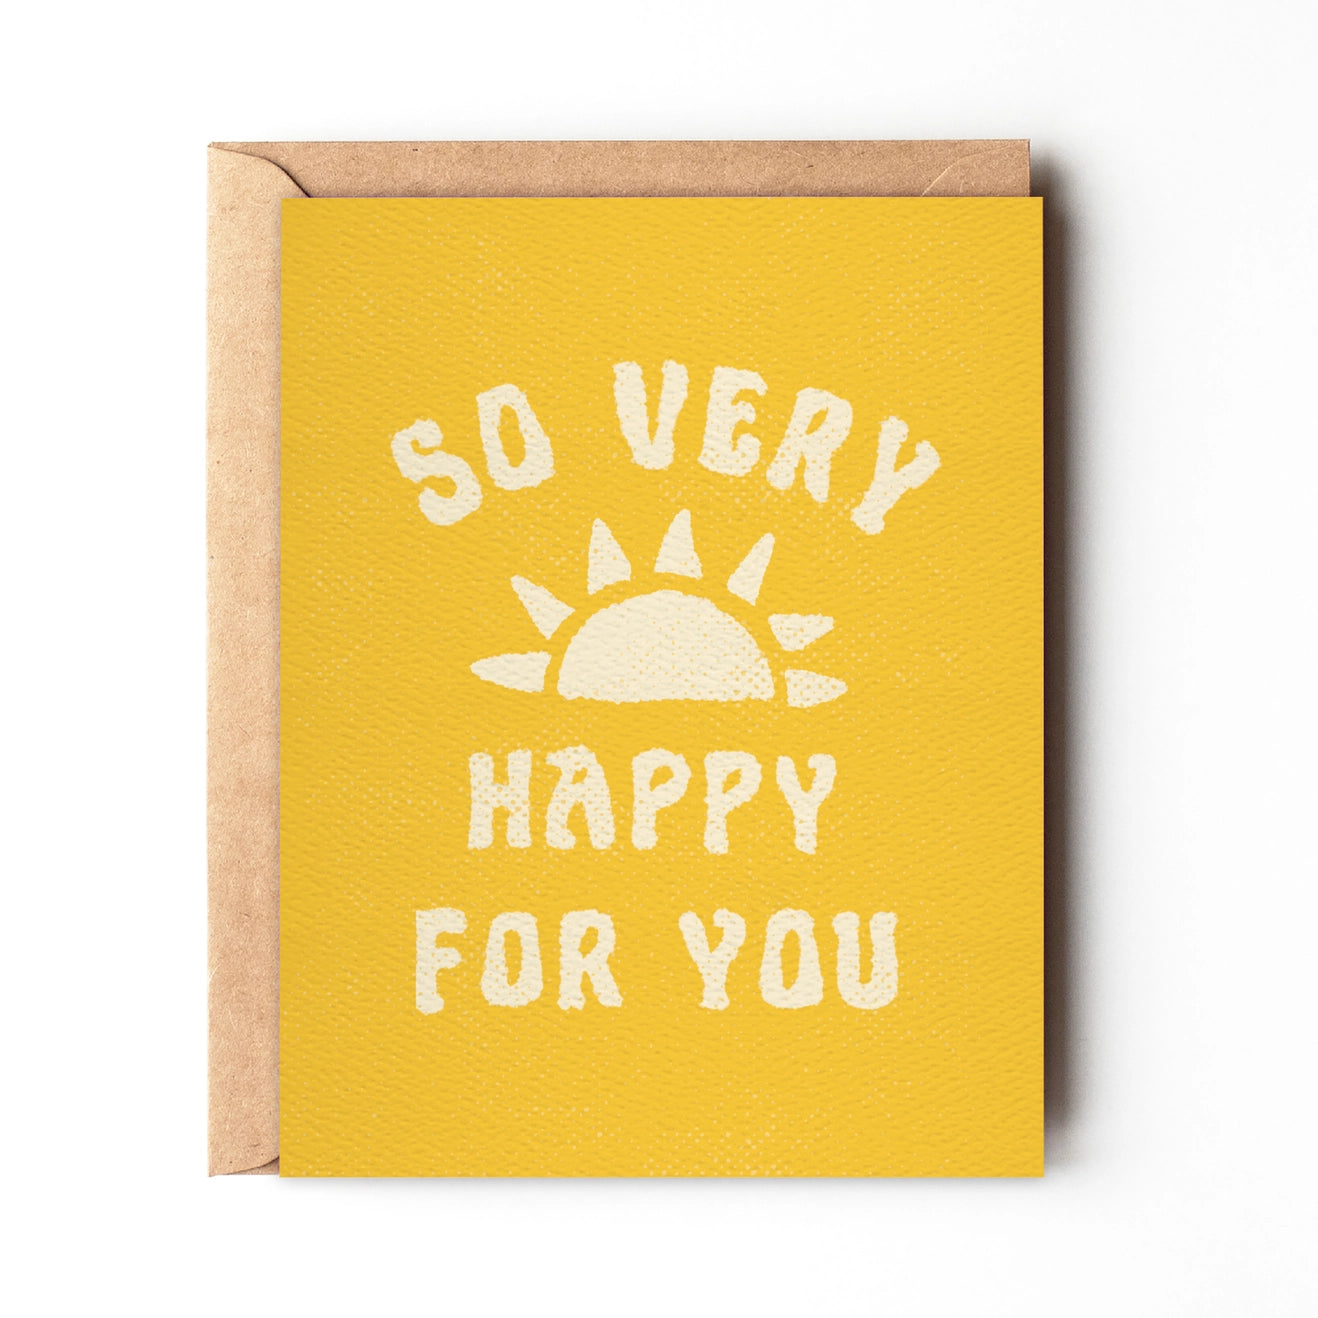 So Very Happy For You - Greeting Card